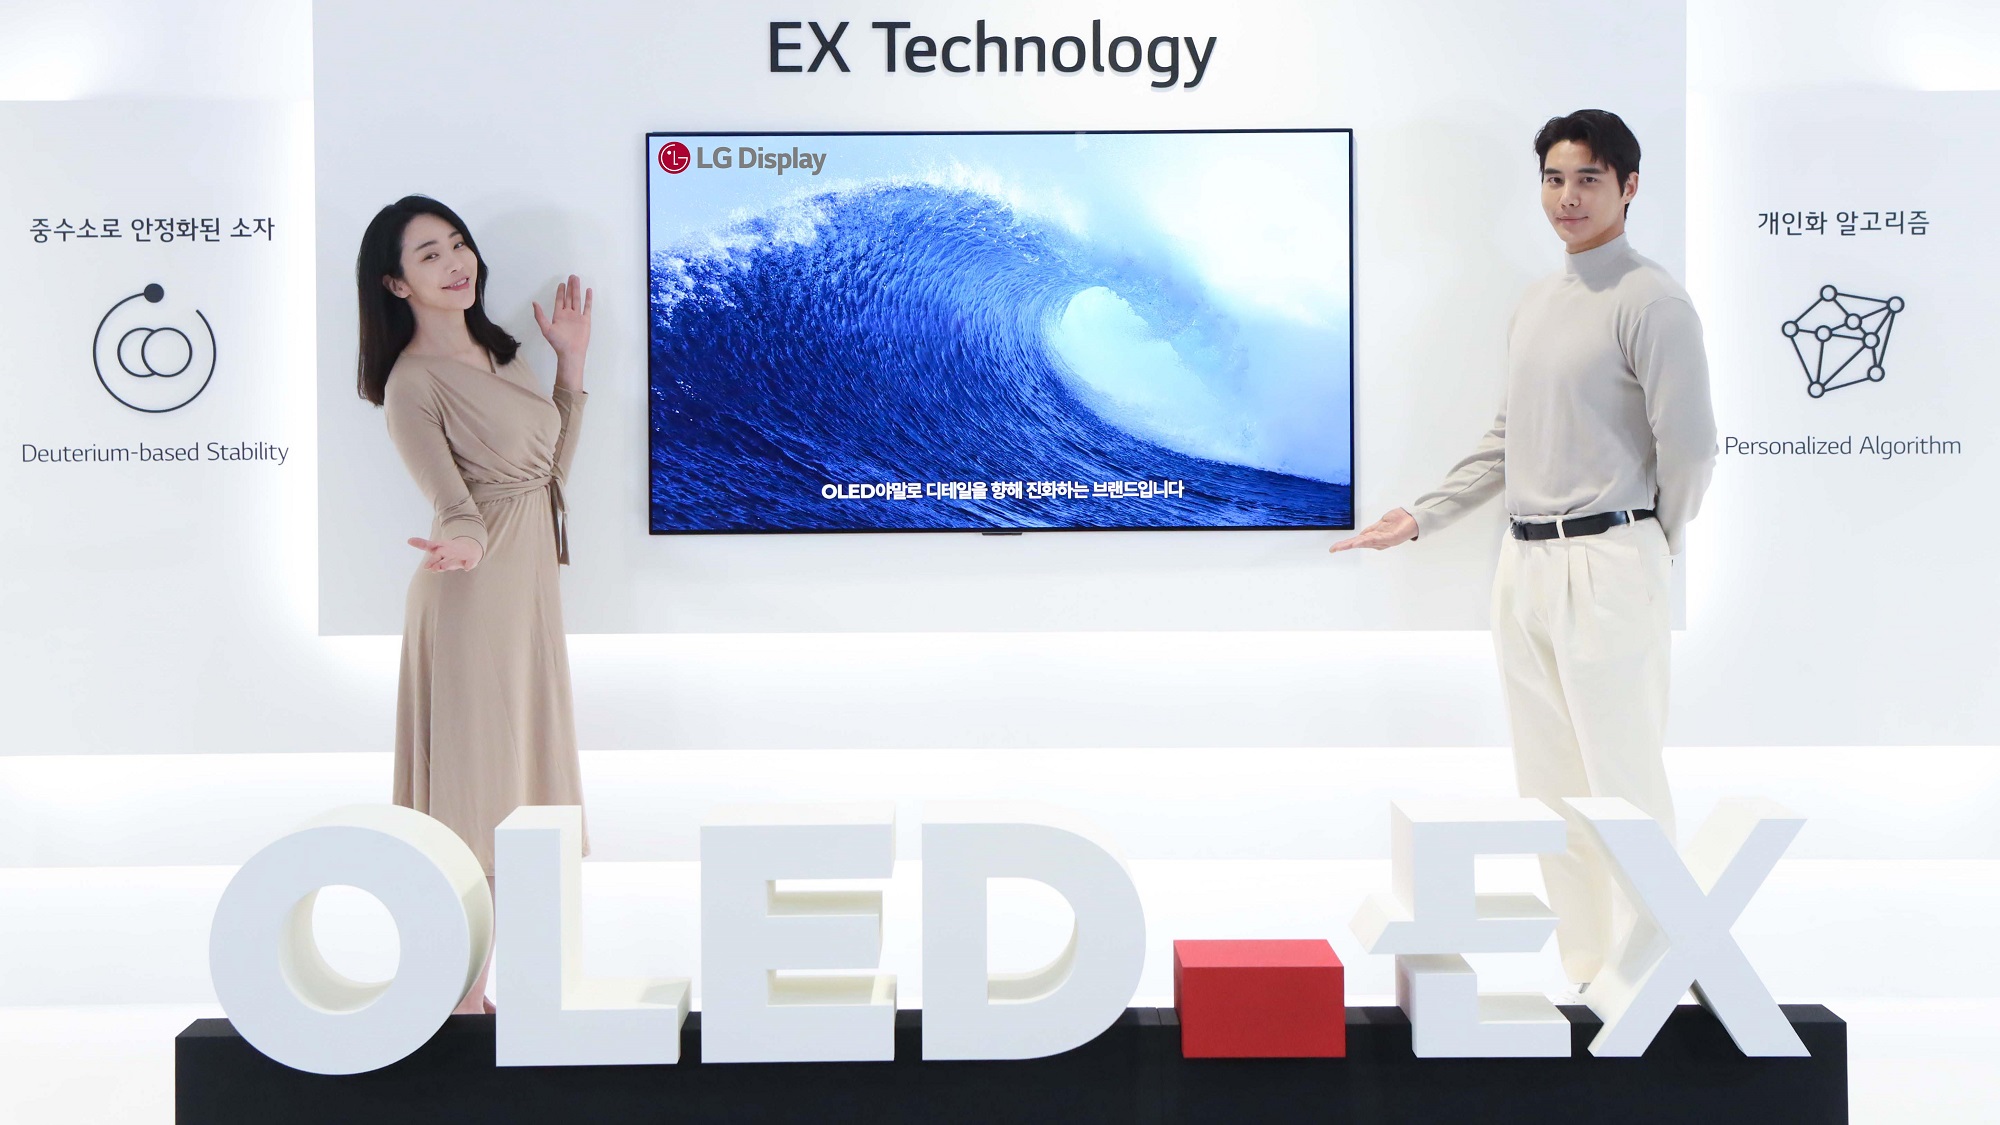 A man and a woman stand in front of an LG OLED EX television.